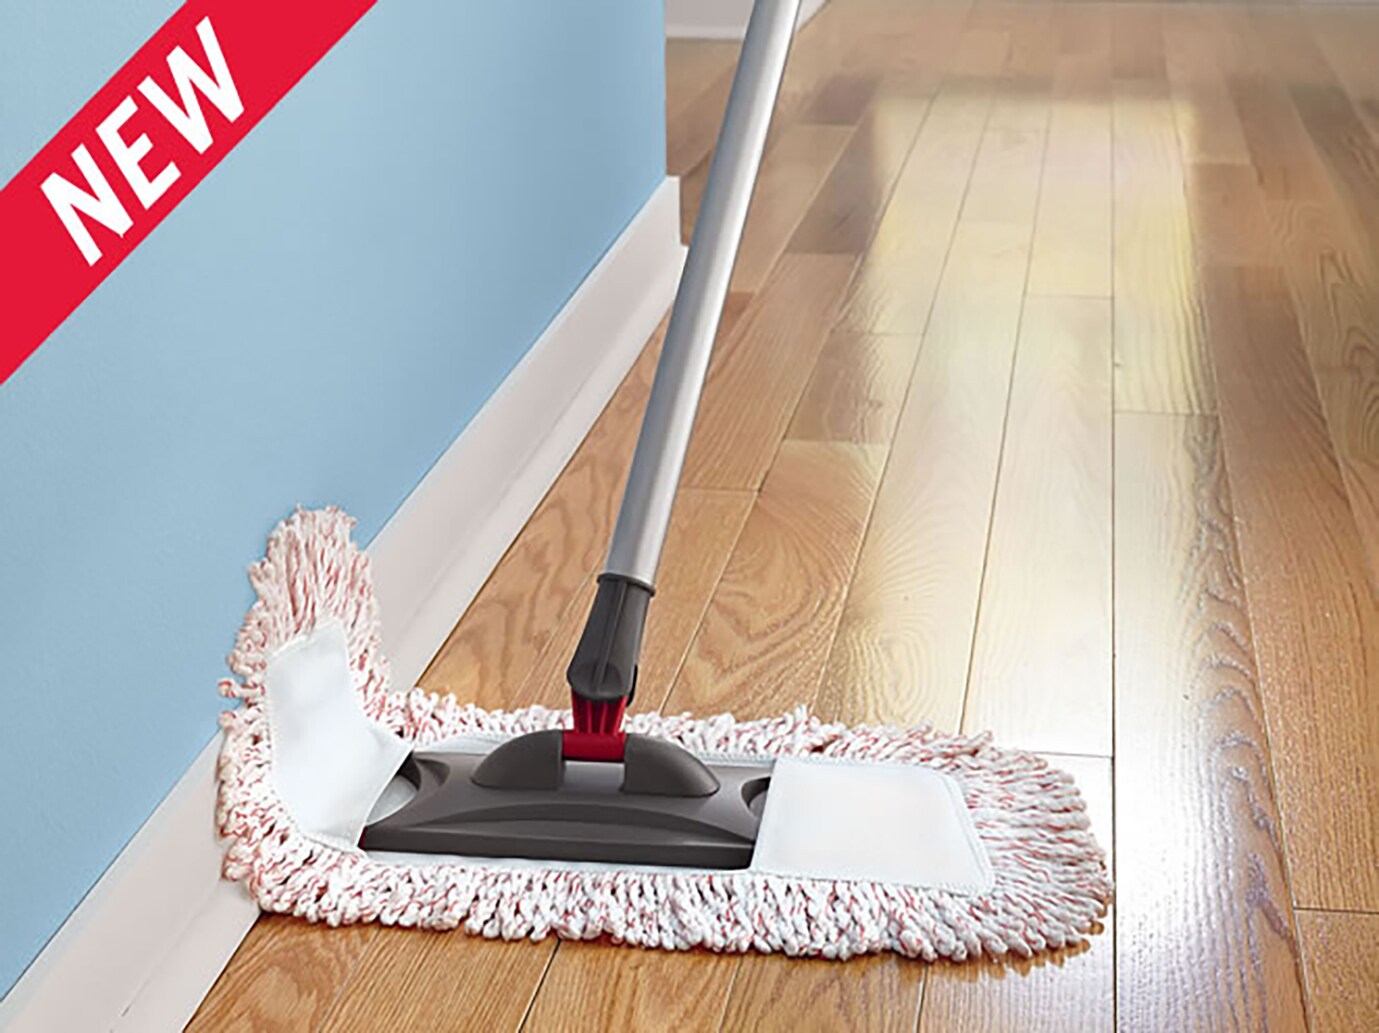 Rubbermaid MICROFIBER FLEXIBLE SWEEPER REFILL in the Mop Refills &  Replacement Heads department at